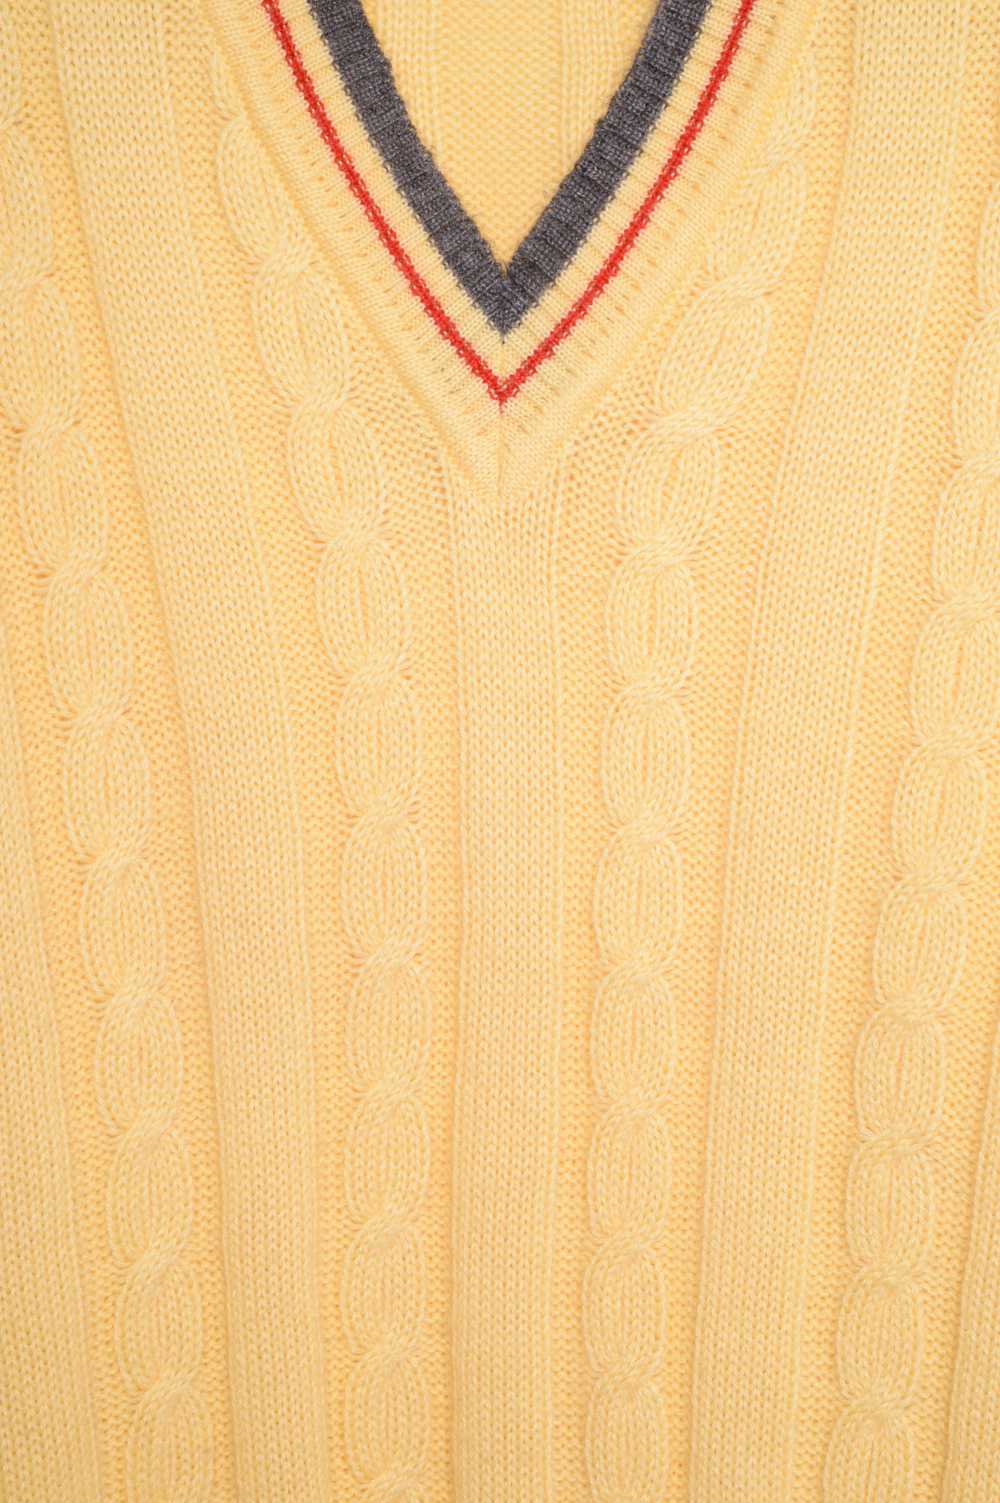 1980s Cable Knit Sweater - image 2